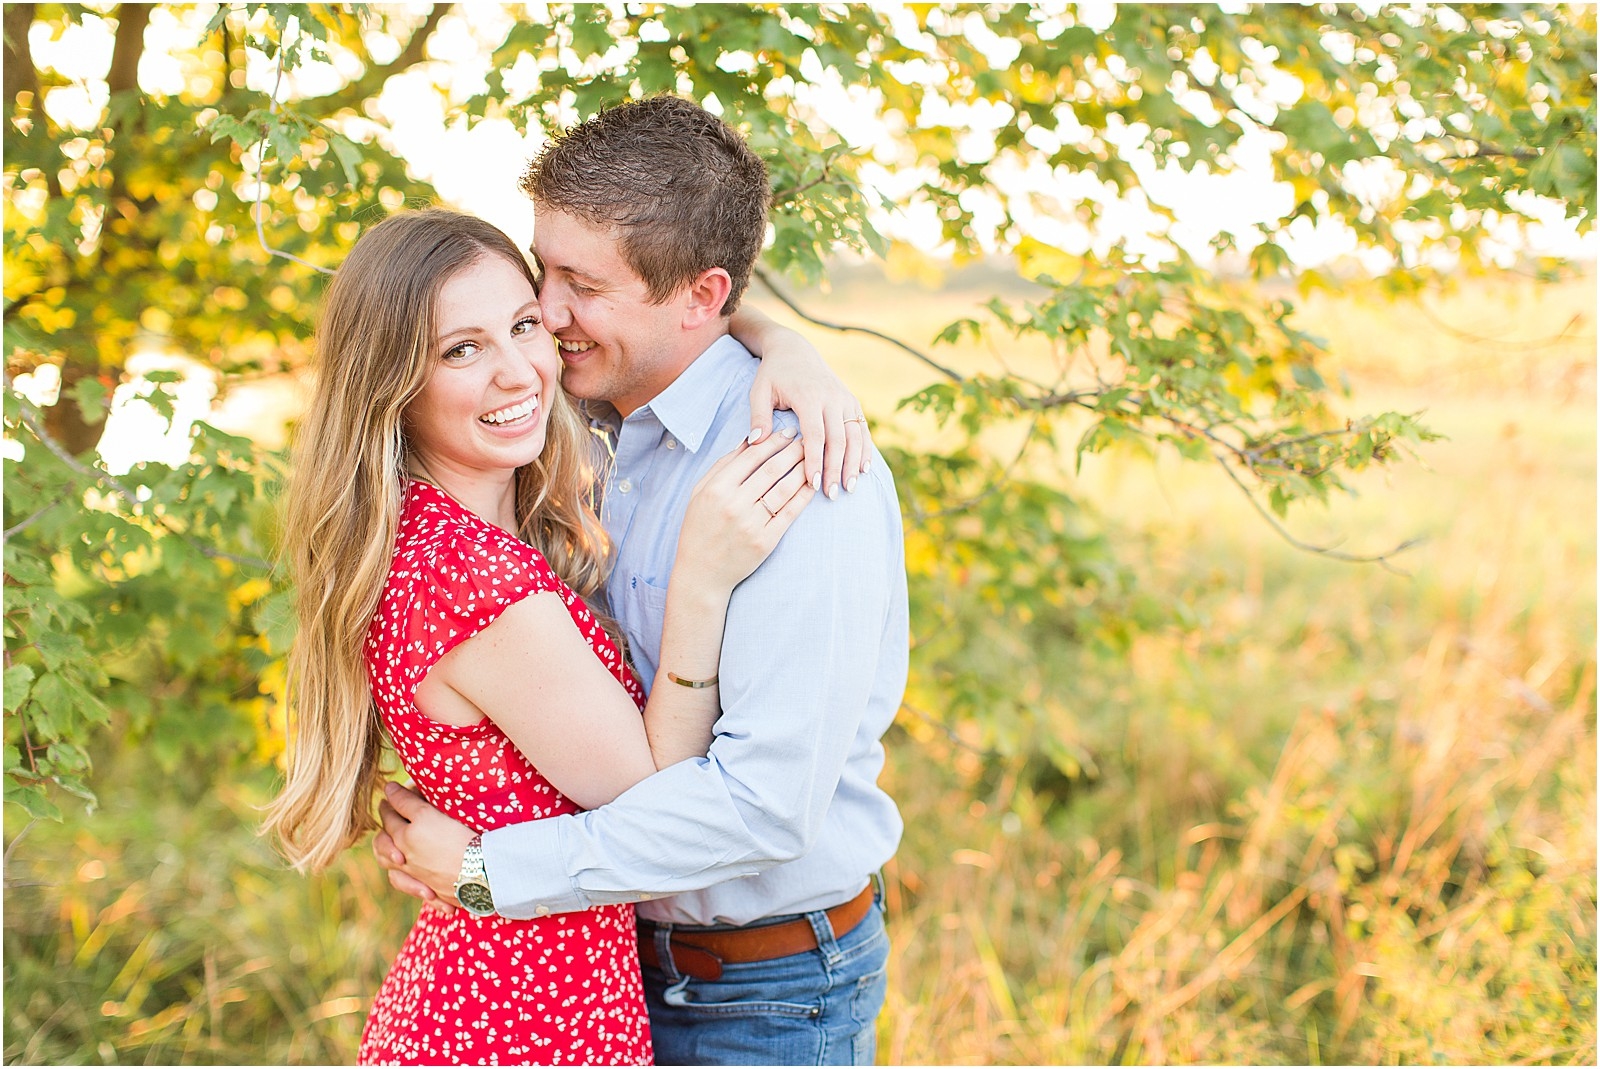 A Jasper Indiana Engagement Session | Tori and Kyle | Bret and Brandie Photography042.jpg